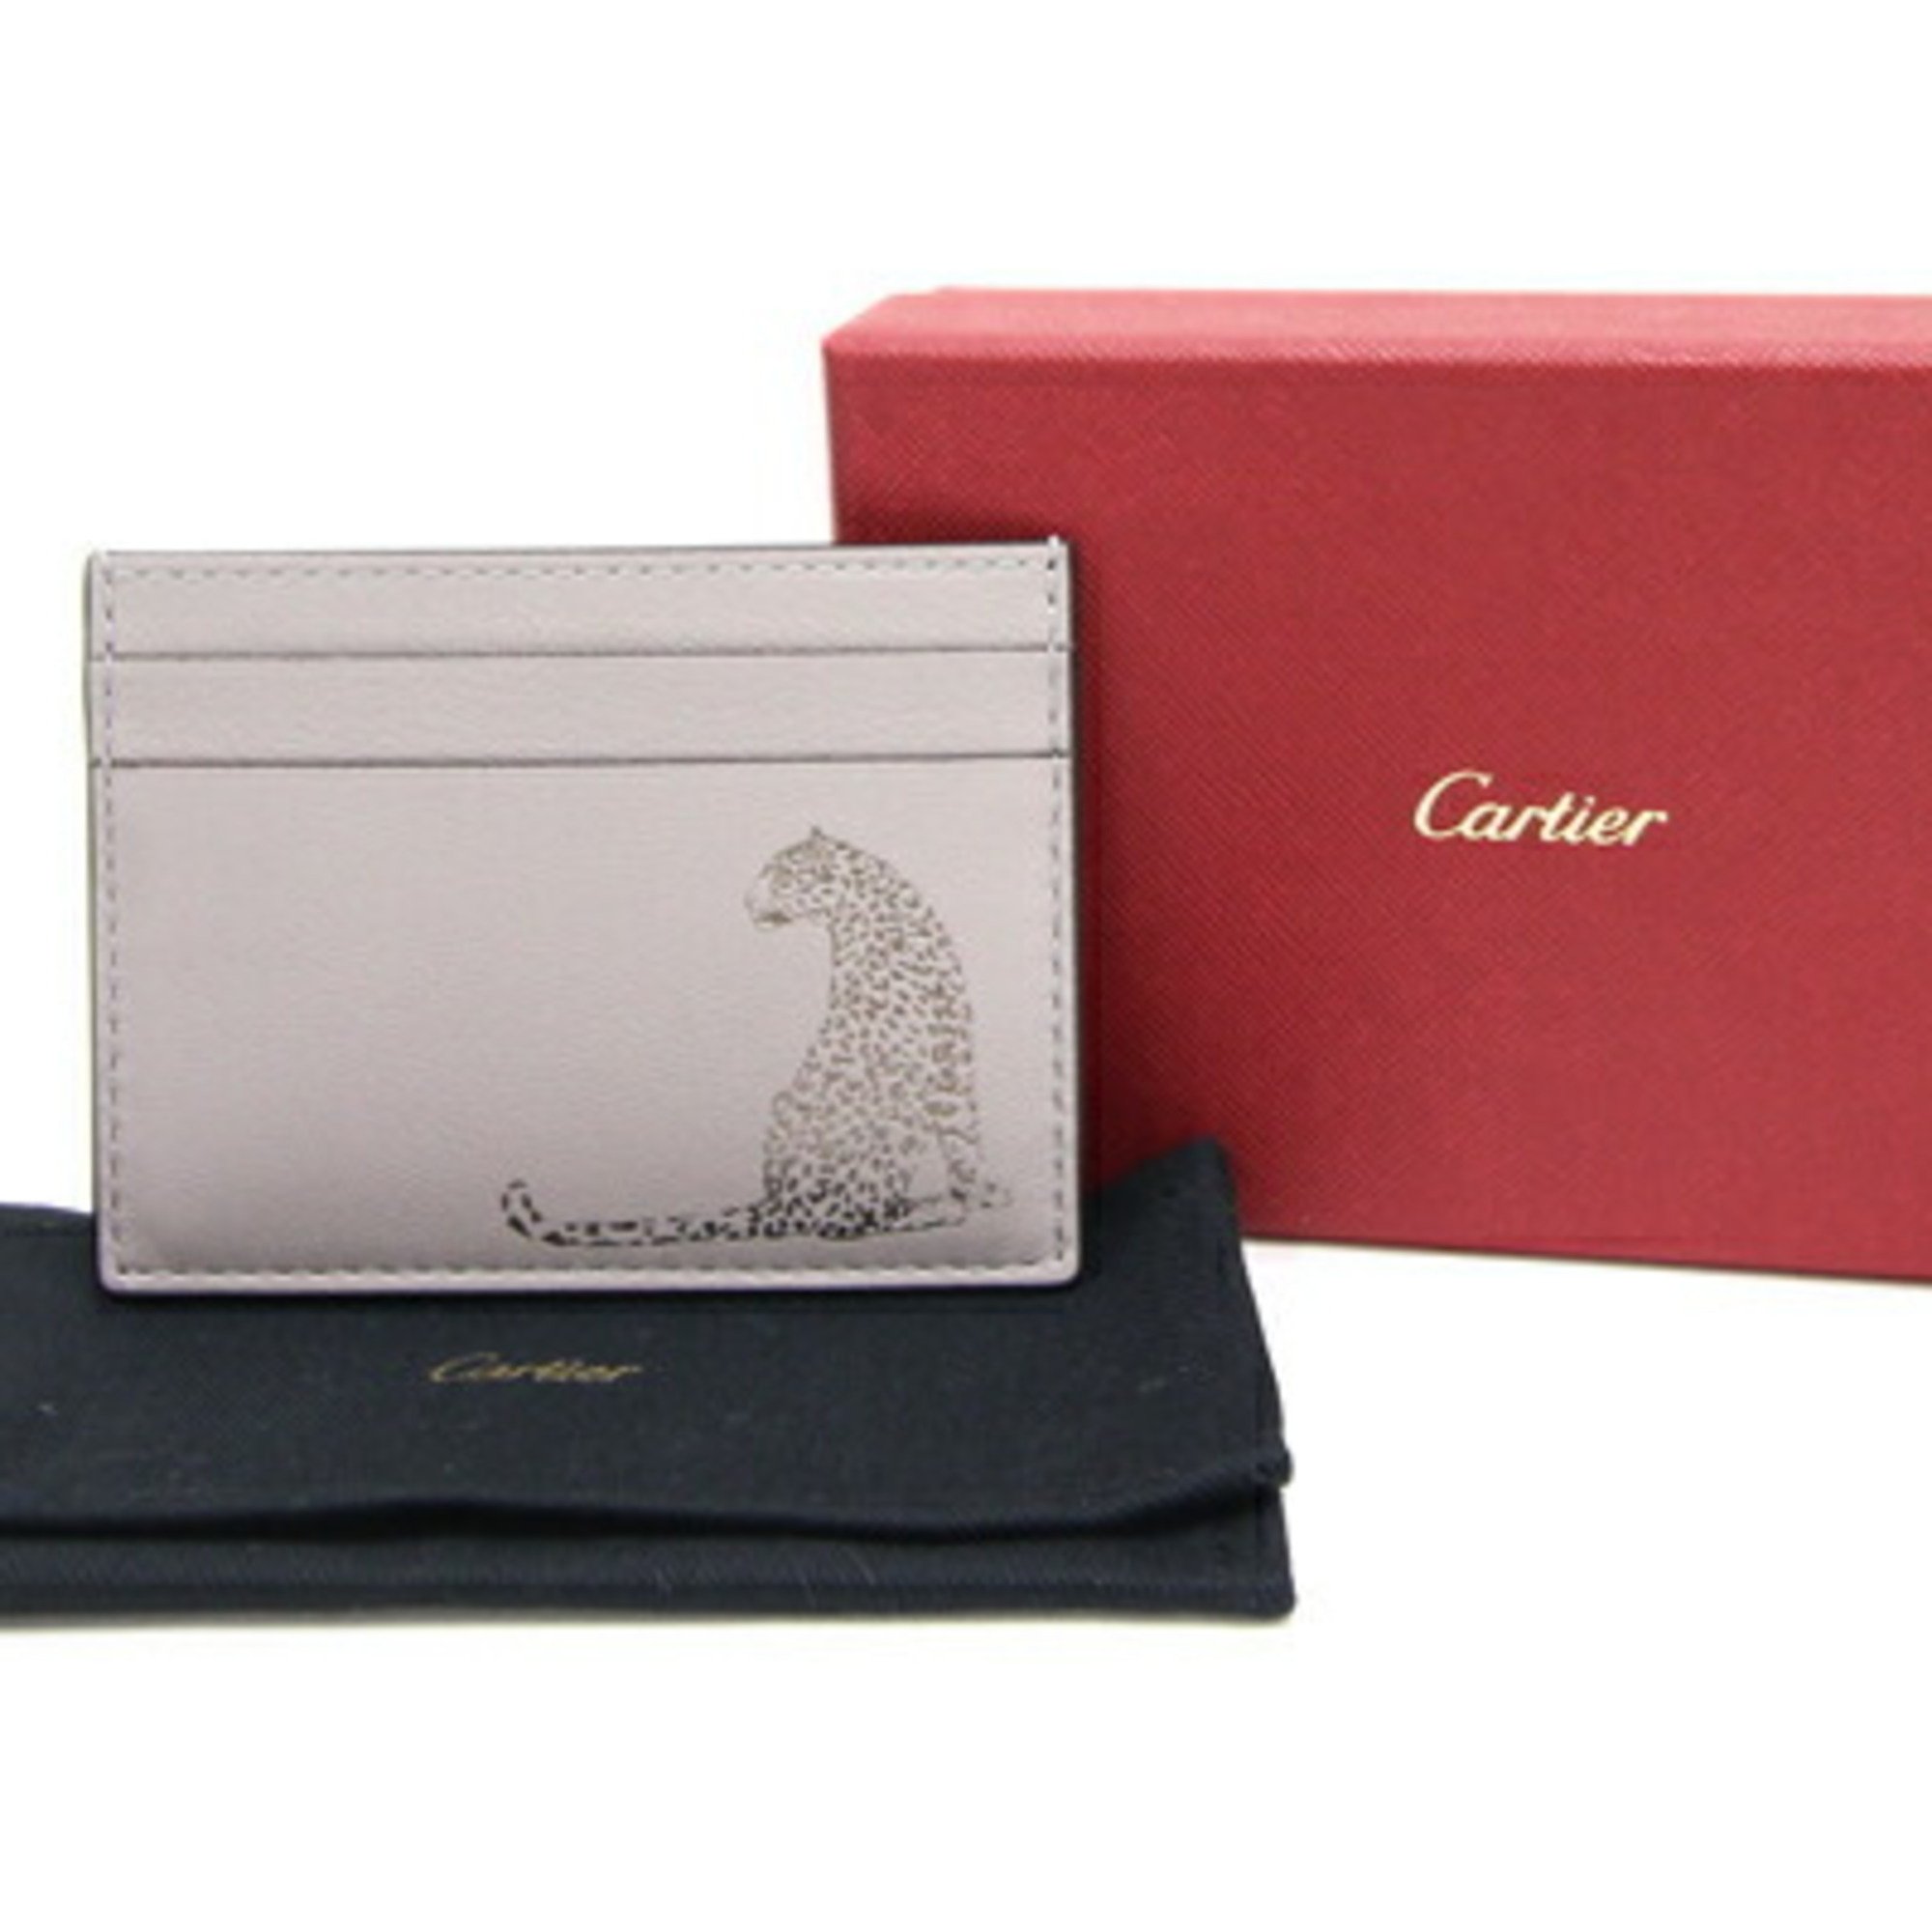 Cartier Card Case Panther Grey Leather Leopard Business Holder Men's Women's